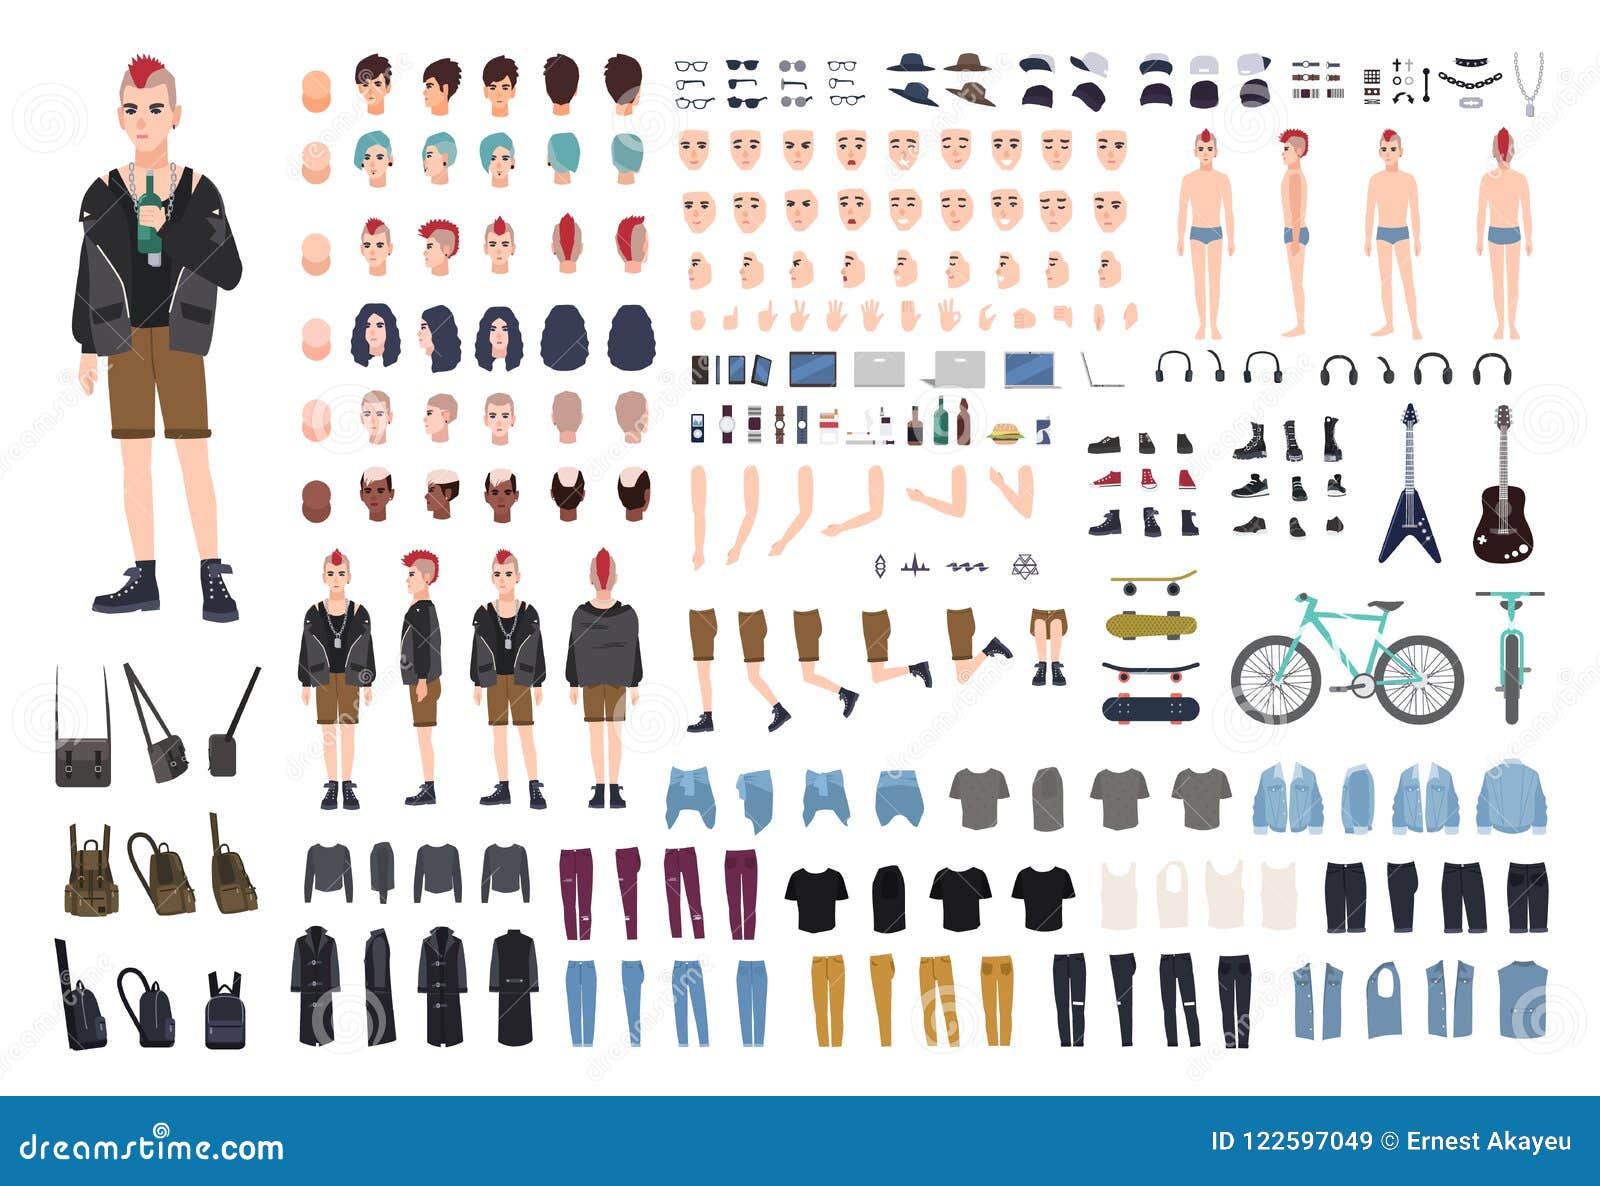 punk diy or constructor kit. set of young male character or teenager body parts, emotions, postures, outfit, subculture